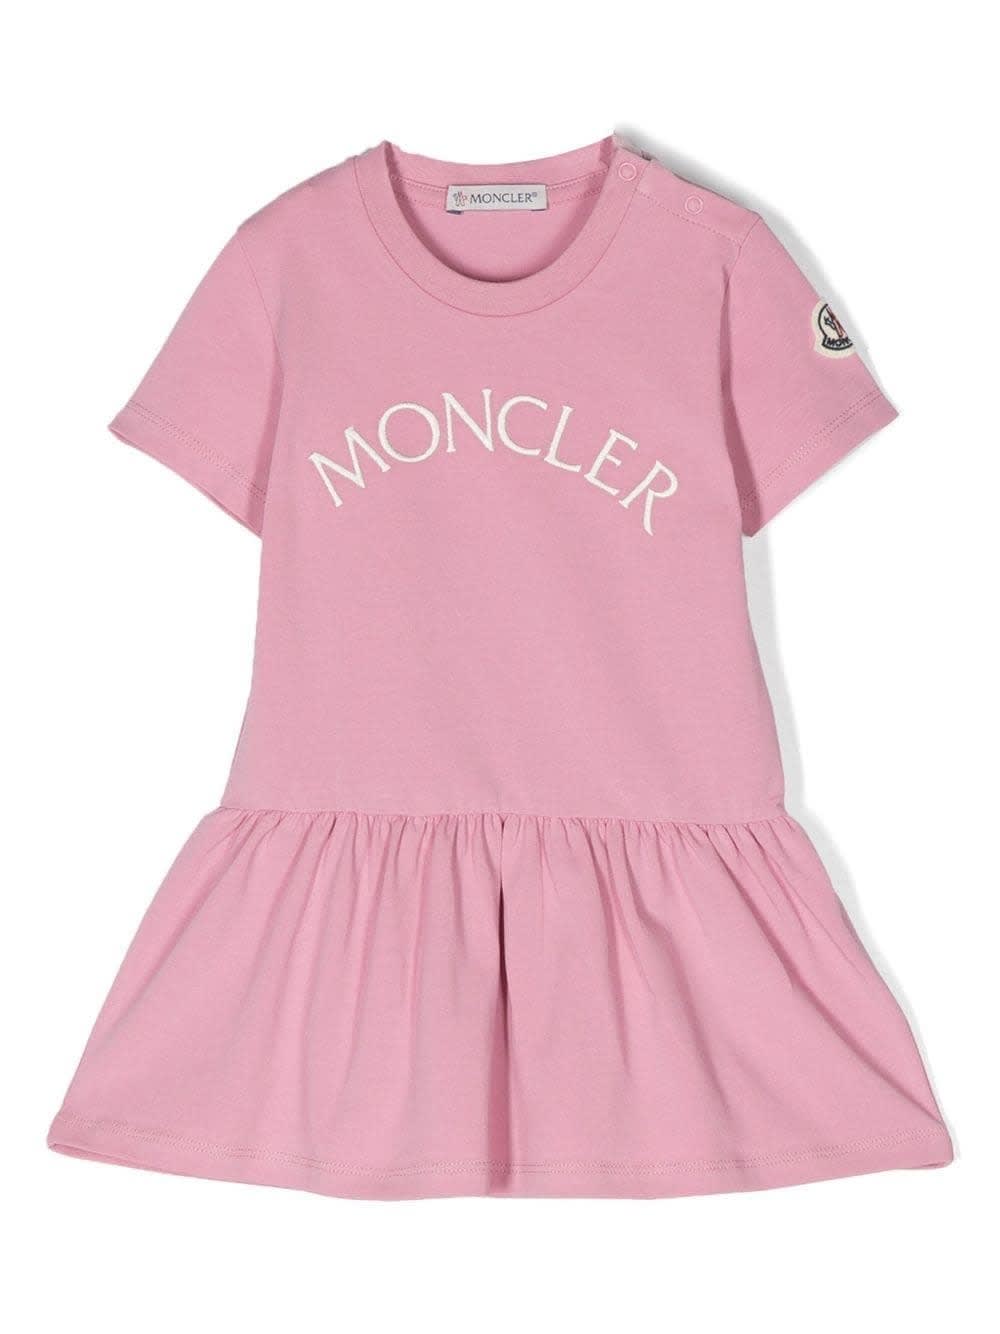 MONCLER PINK DRESS WITH EMBROIDERED LOGO